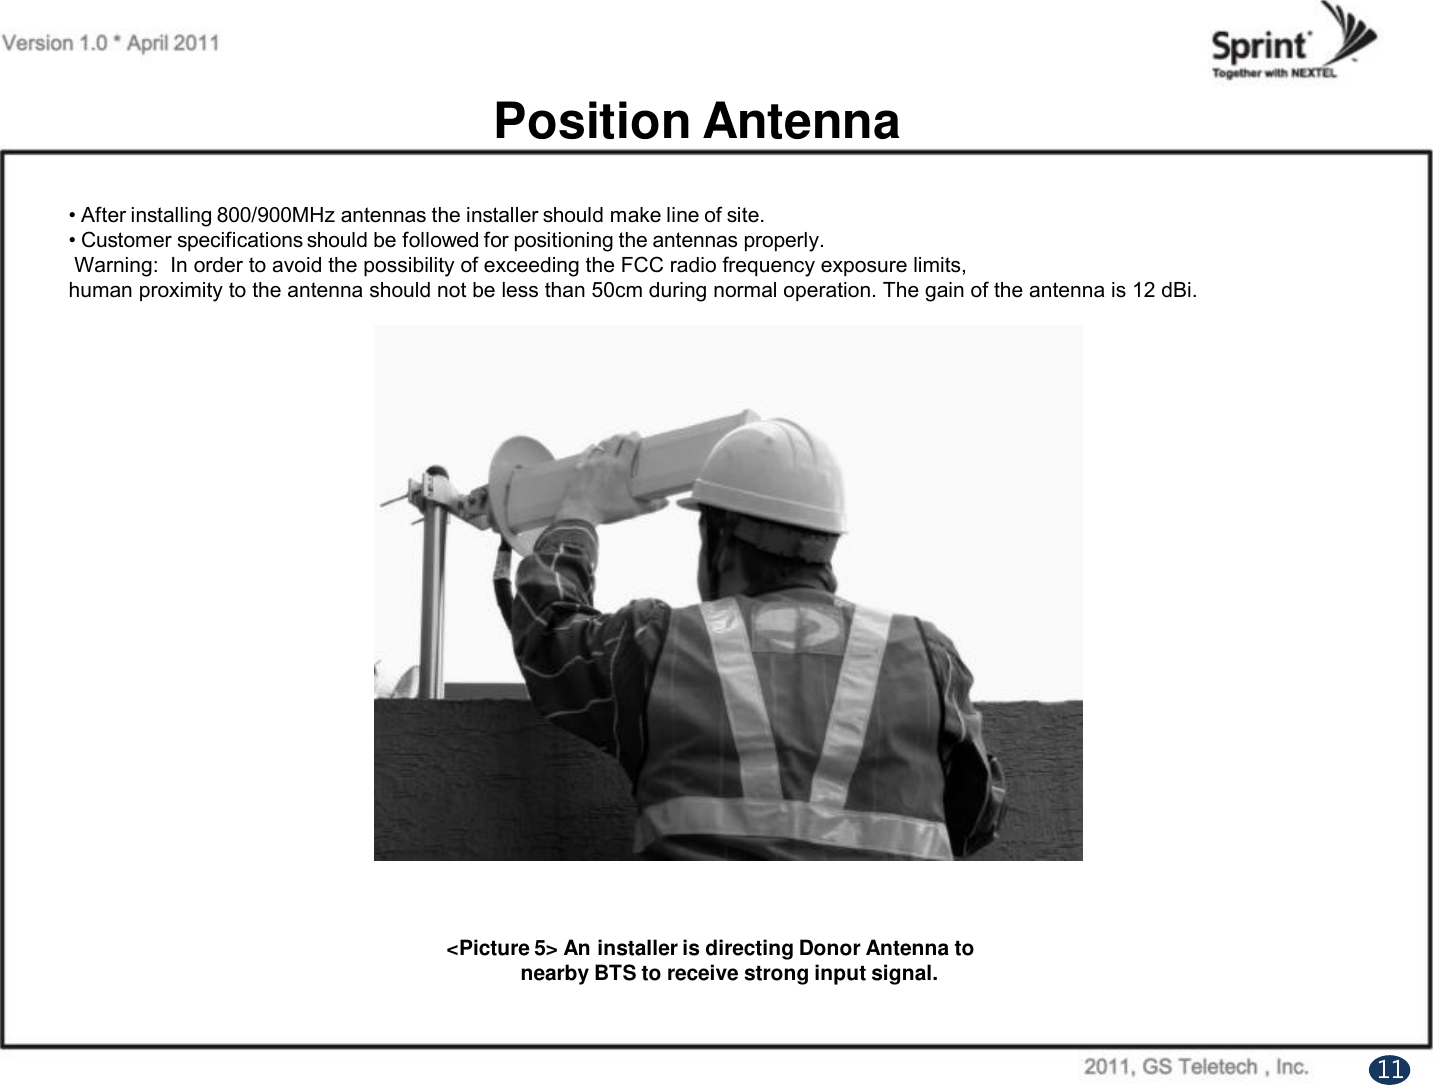 Position Antenna• After installing 800/900MHz antennas the installer should make line of site. • Customer specifications should be followed for positioning the antennas properly. Warning:  In order to avoid the possibility of exceeding the FCC radio frequency exposure limits, human proximity to the antenna should not be less than 50cm during normal operation. The gain of the antenna is 12 dBi. &lt;Picture 5&gt; An installer is directing Donor Antenna tonearby BTS to receive strong input signal.11